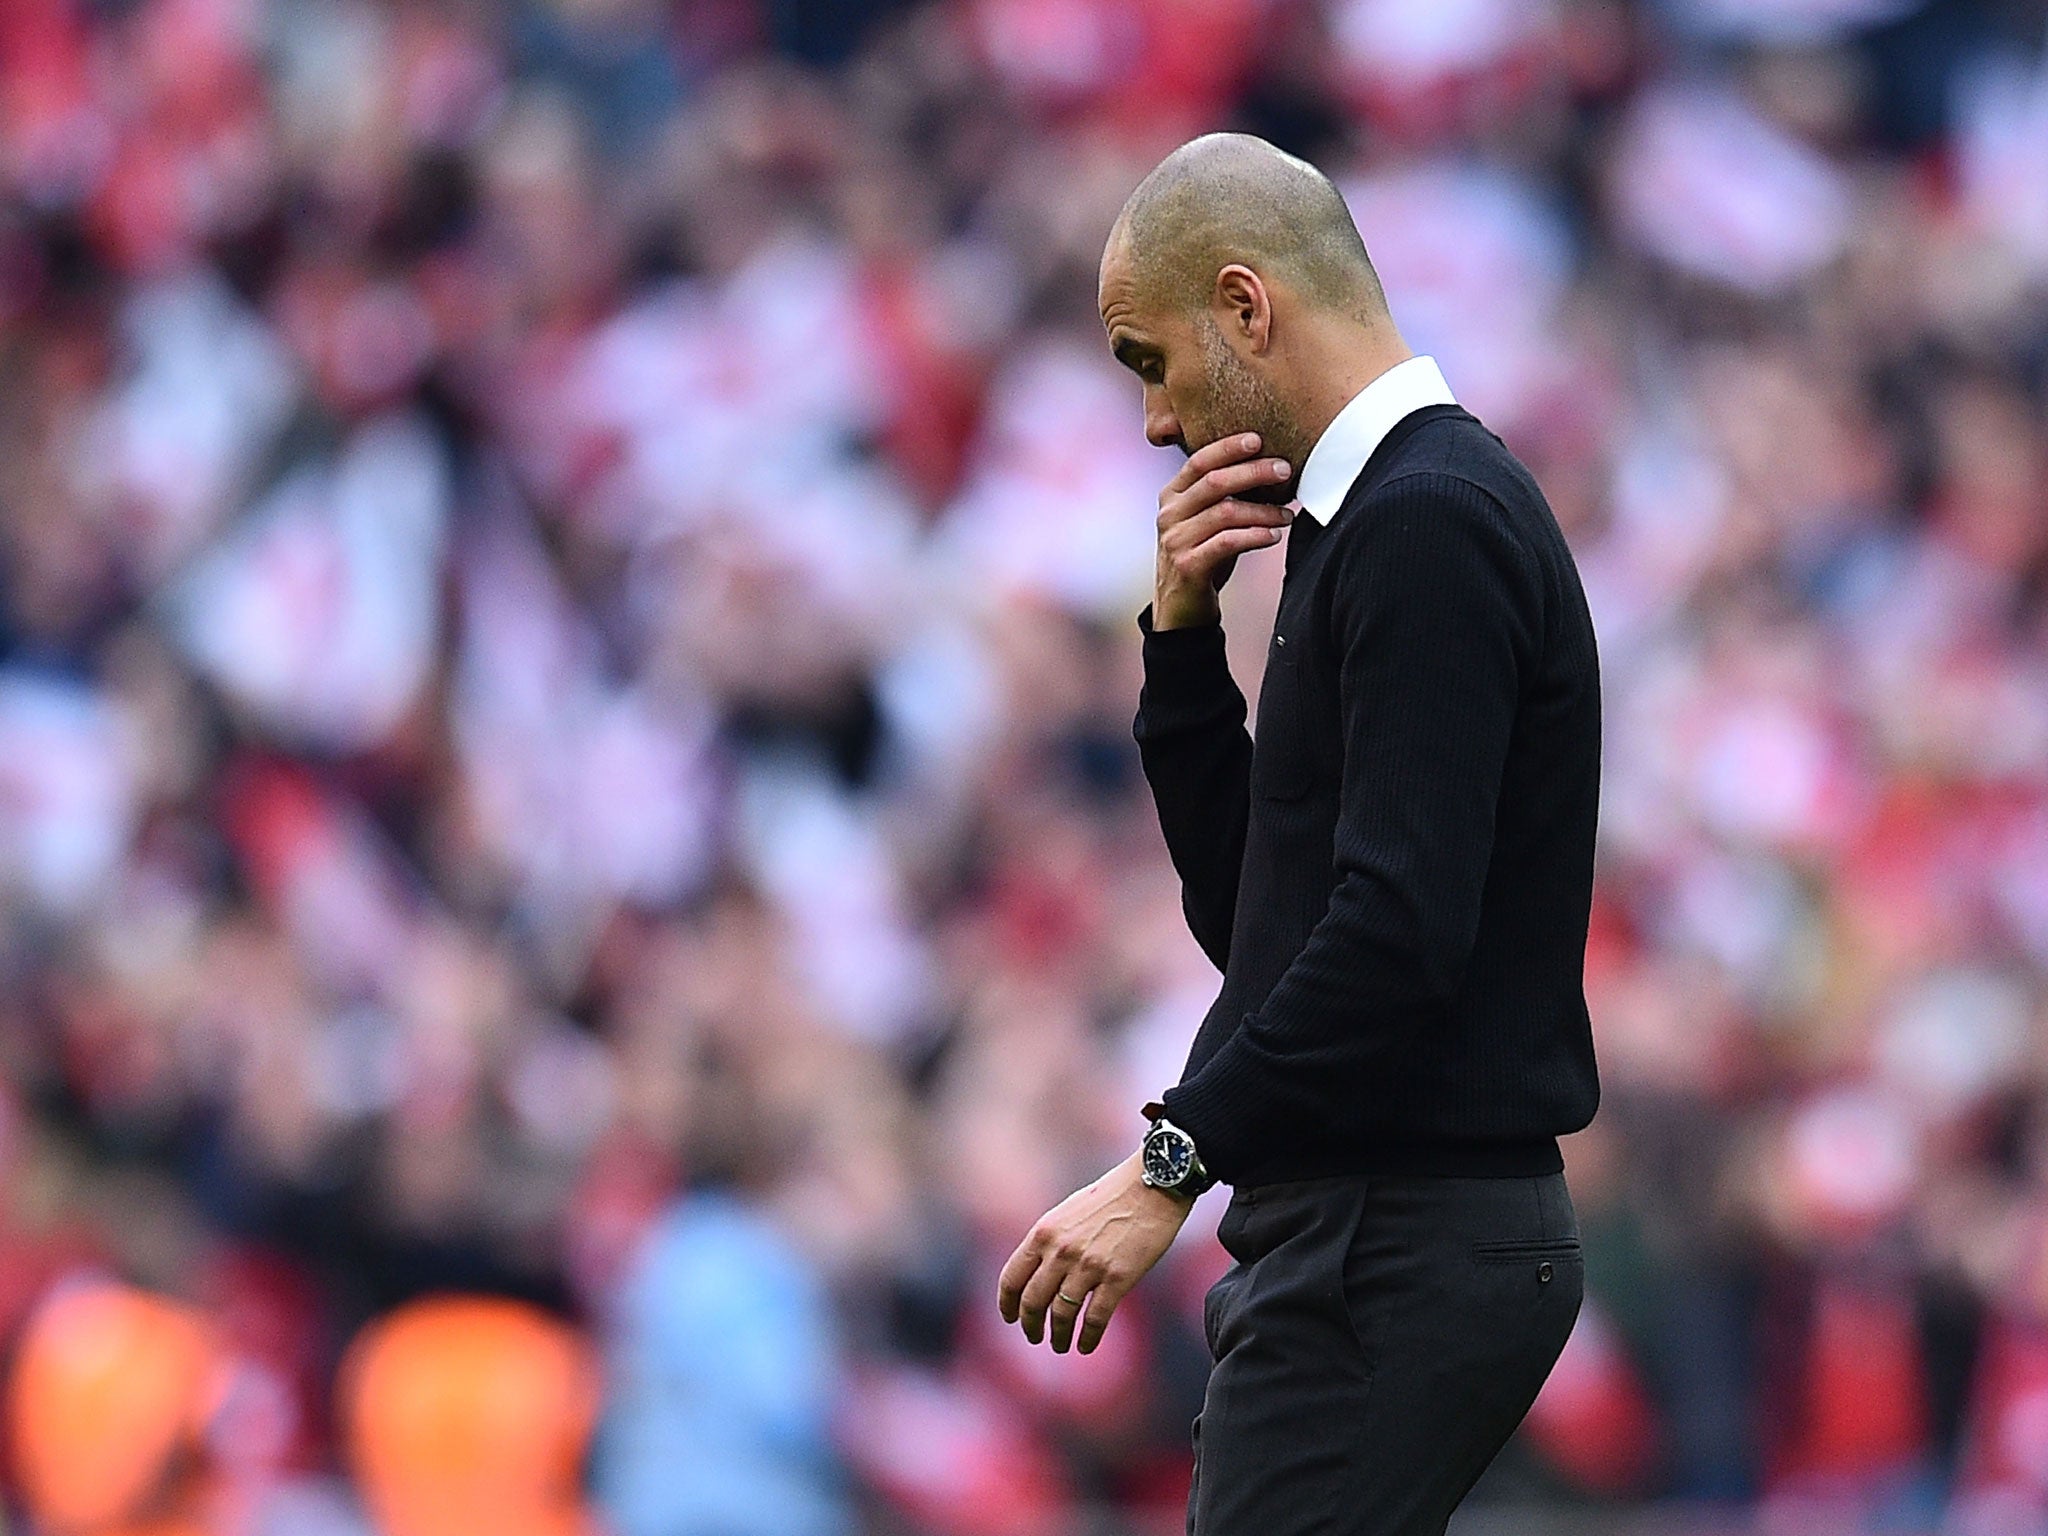 Guardiola has not lived up to his billing in his first year at City